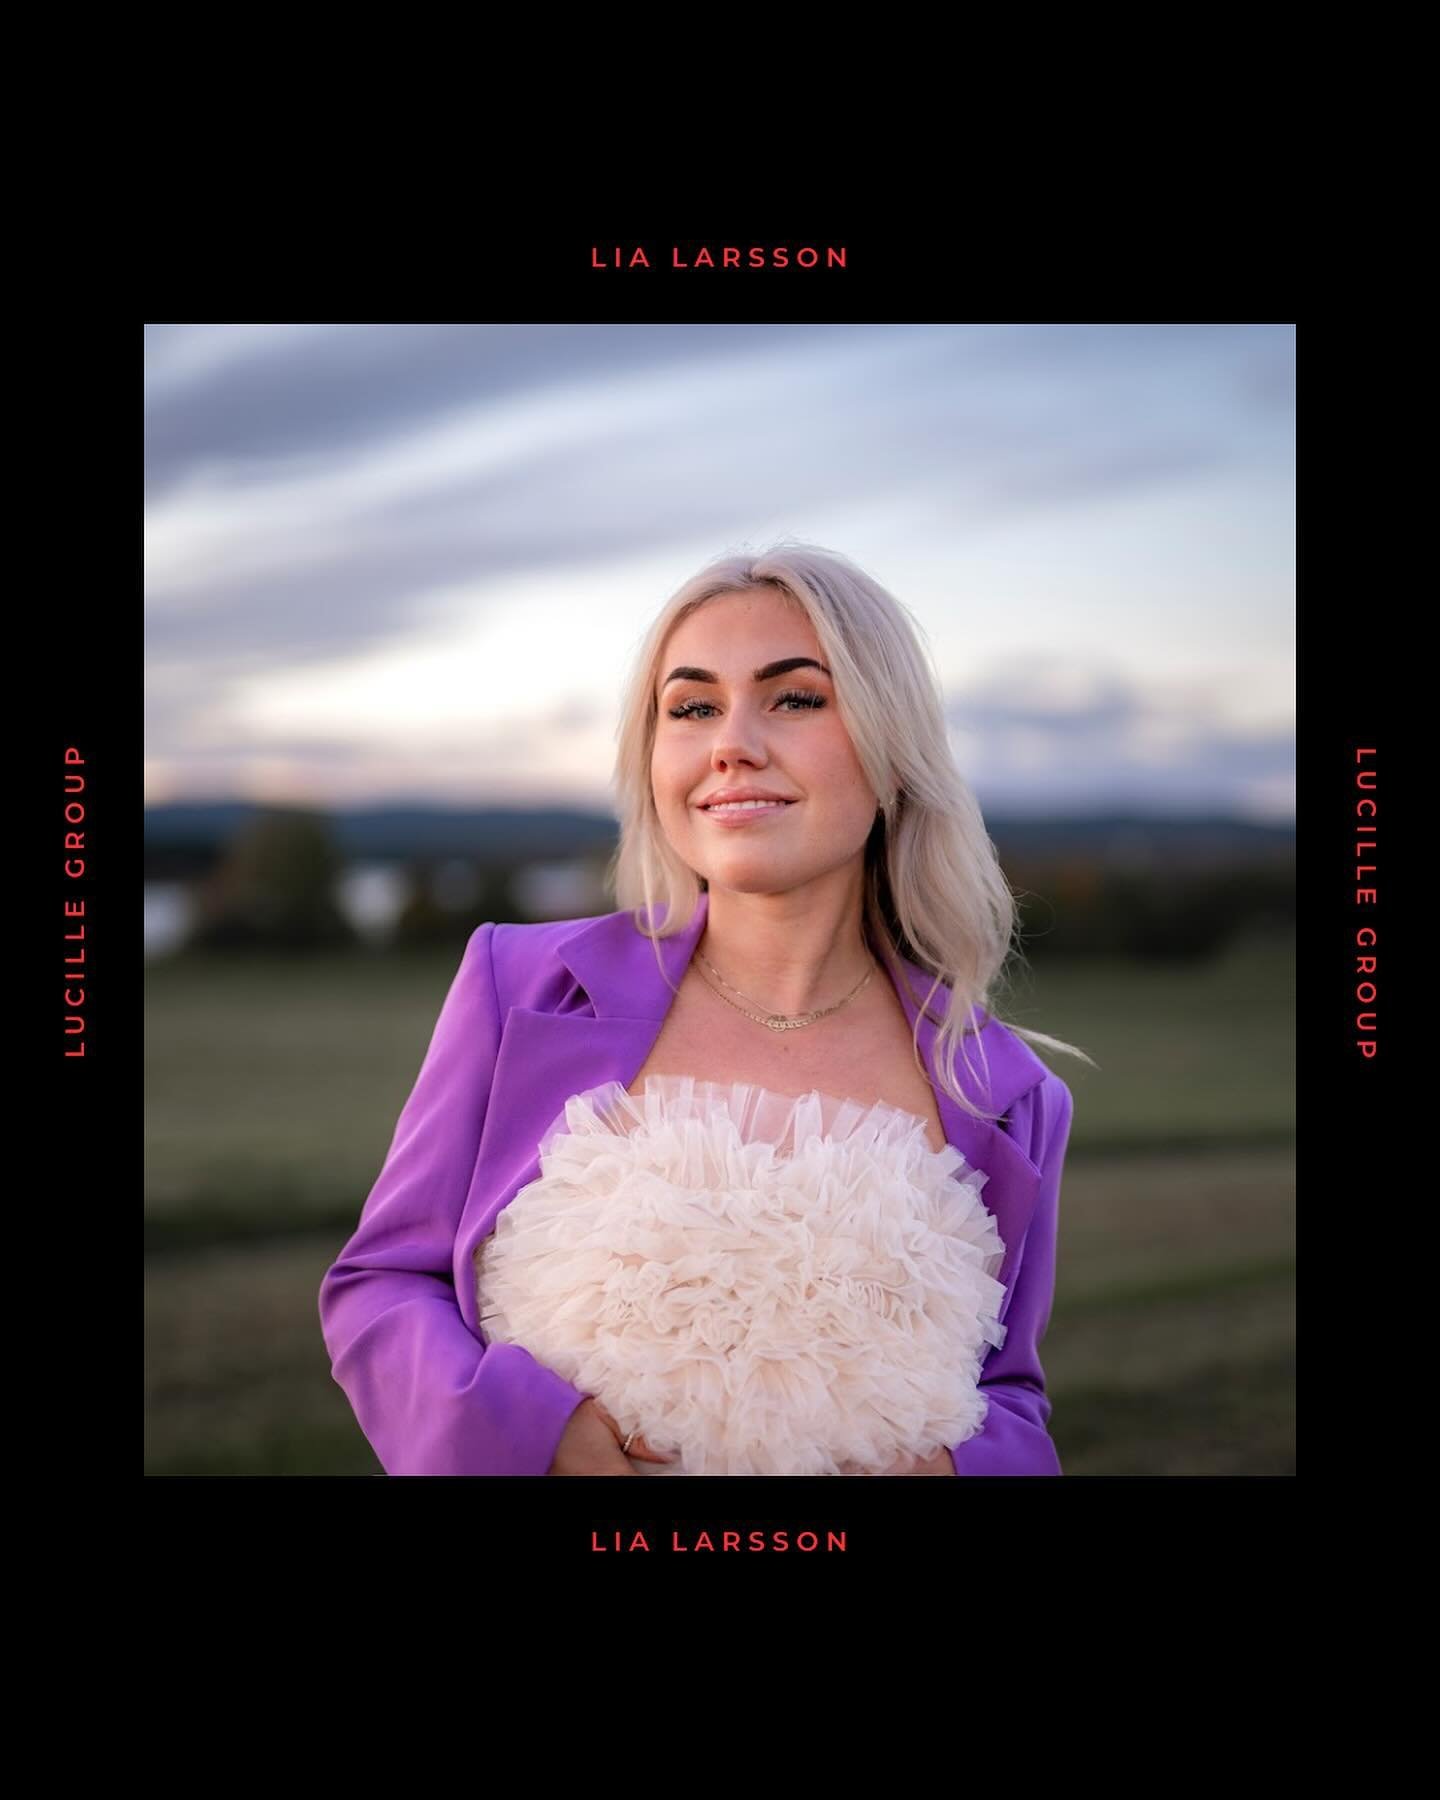 Meet Lia Larsson - a name that is synonymous with &ldquo;epa-dunk&rdquo;, one of the biggest genres in Sweden right now. Lia Larsson made her way into many Swedish people&rsquo;s hearts with her humor and dancing, but her big breakthrough came with t